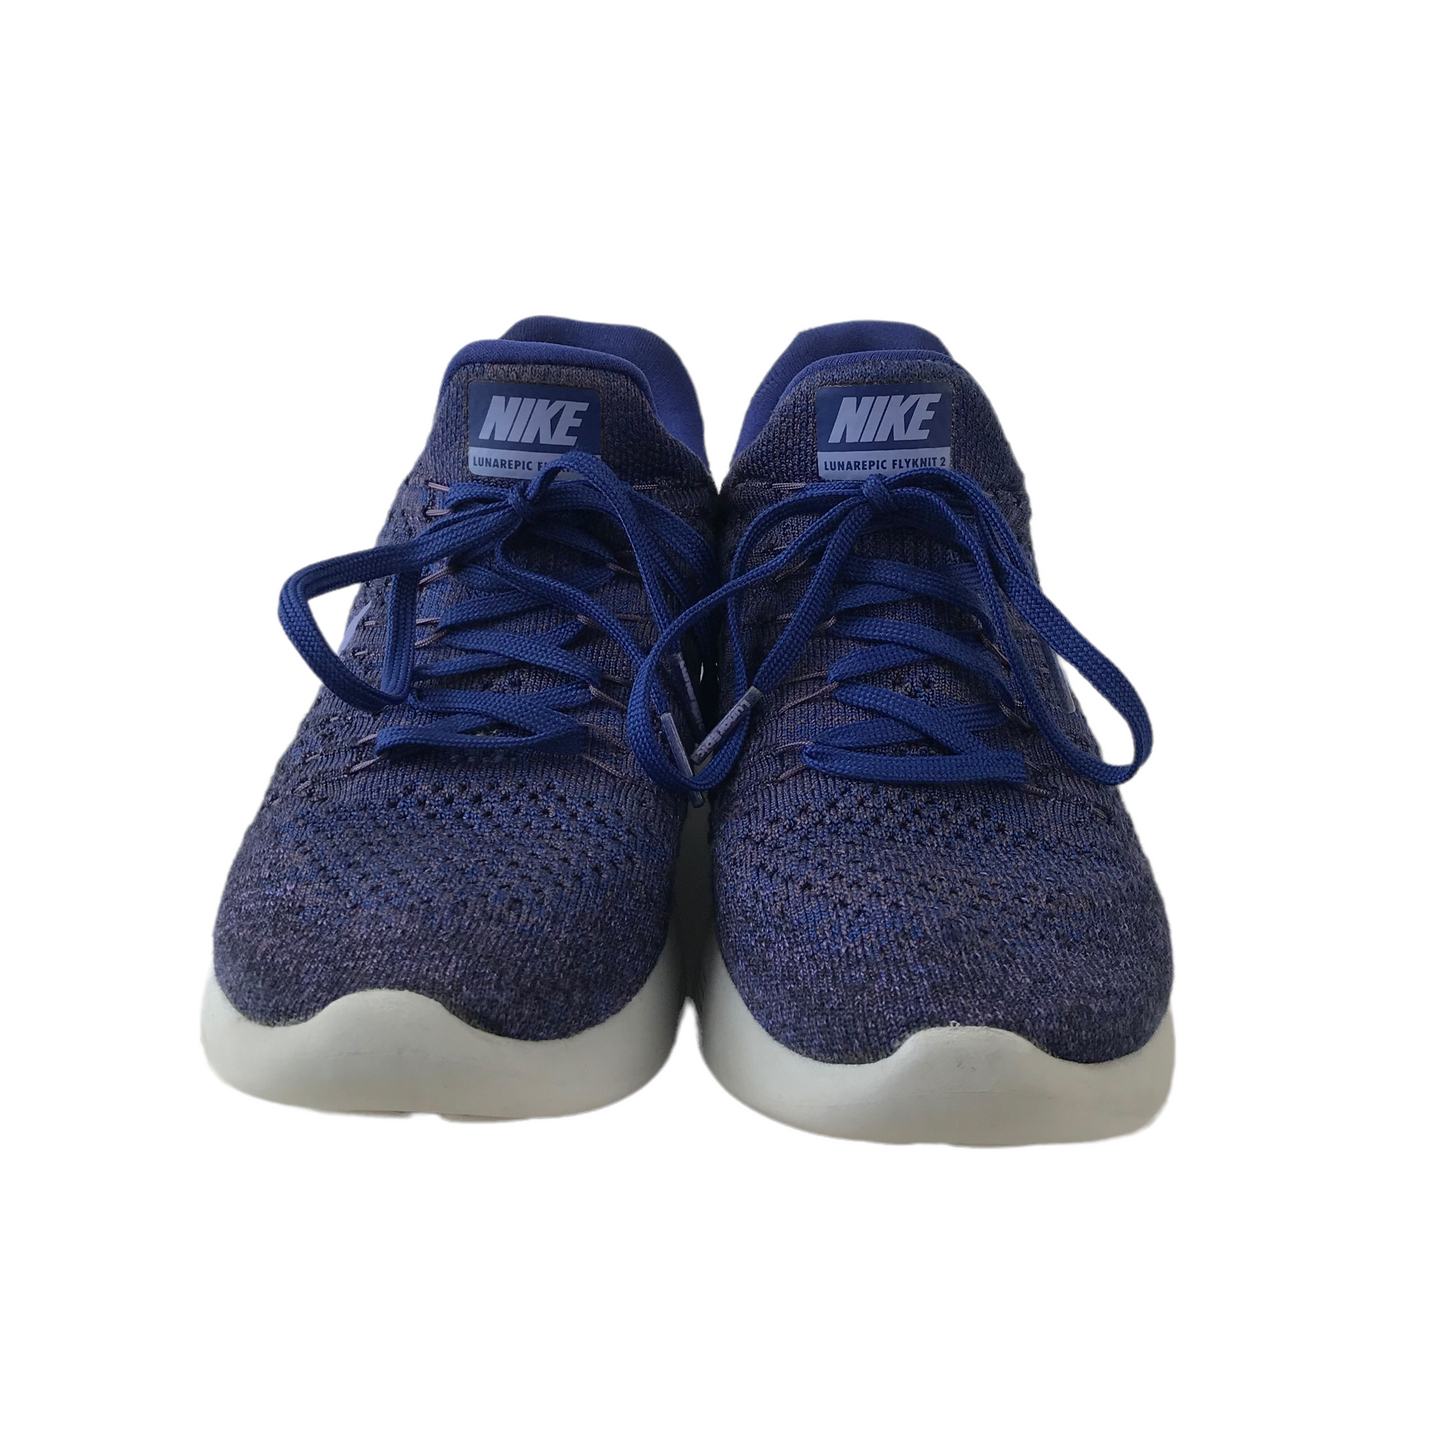 Nike Lunarepic Flyknit 2 Blue and purple Trainers Size UK 4